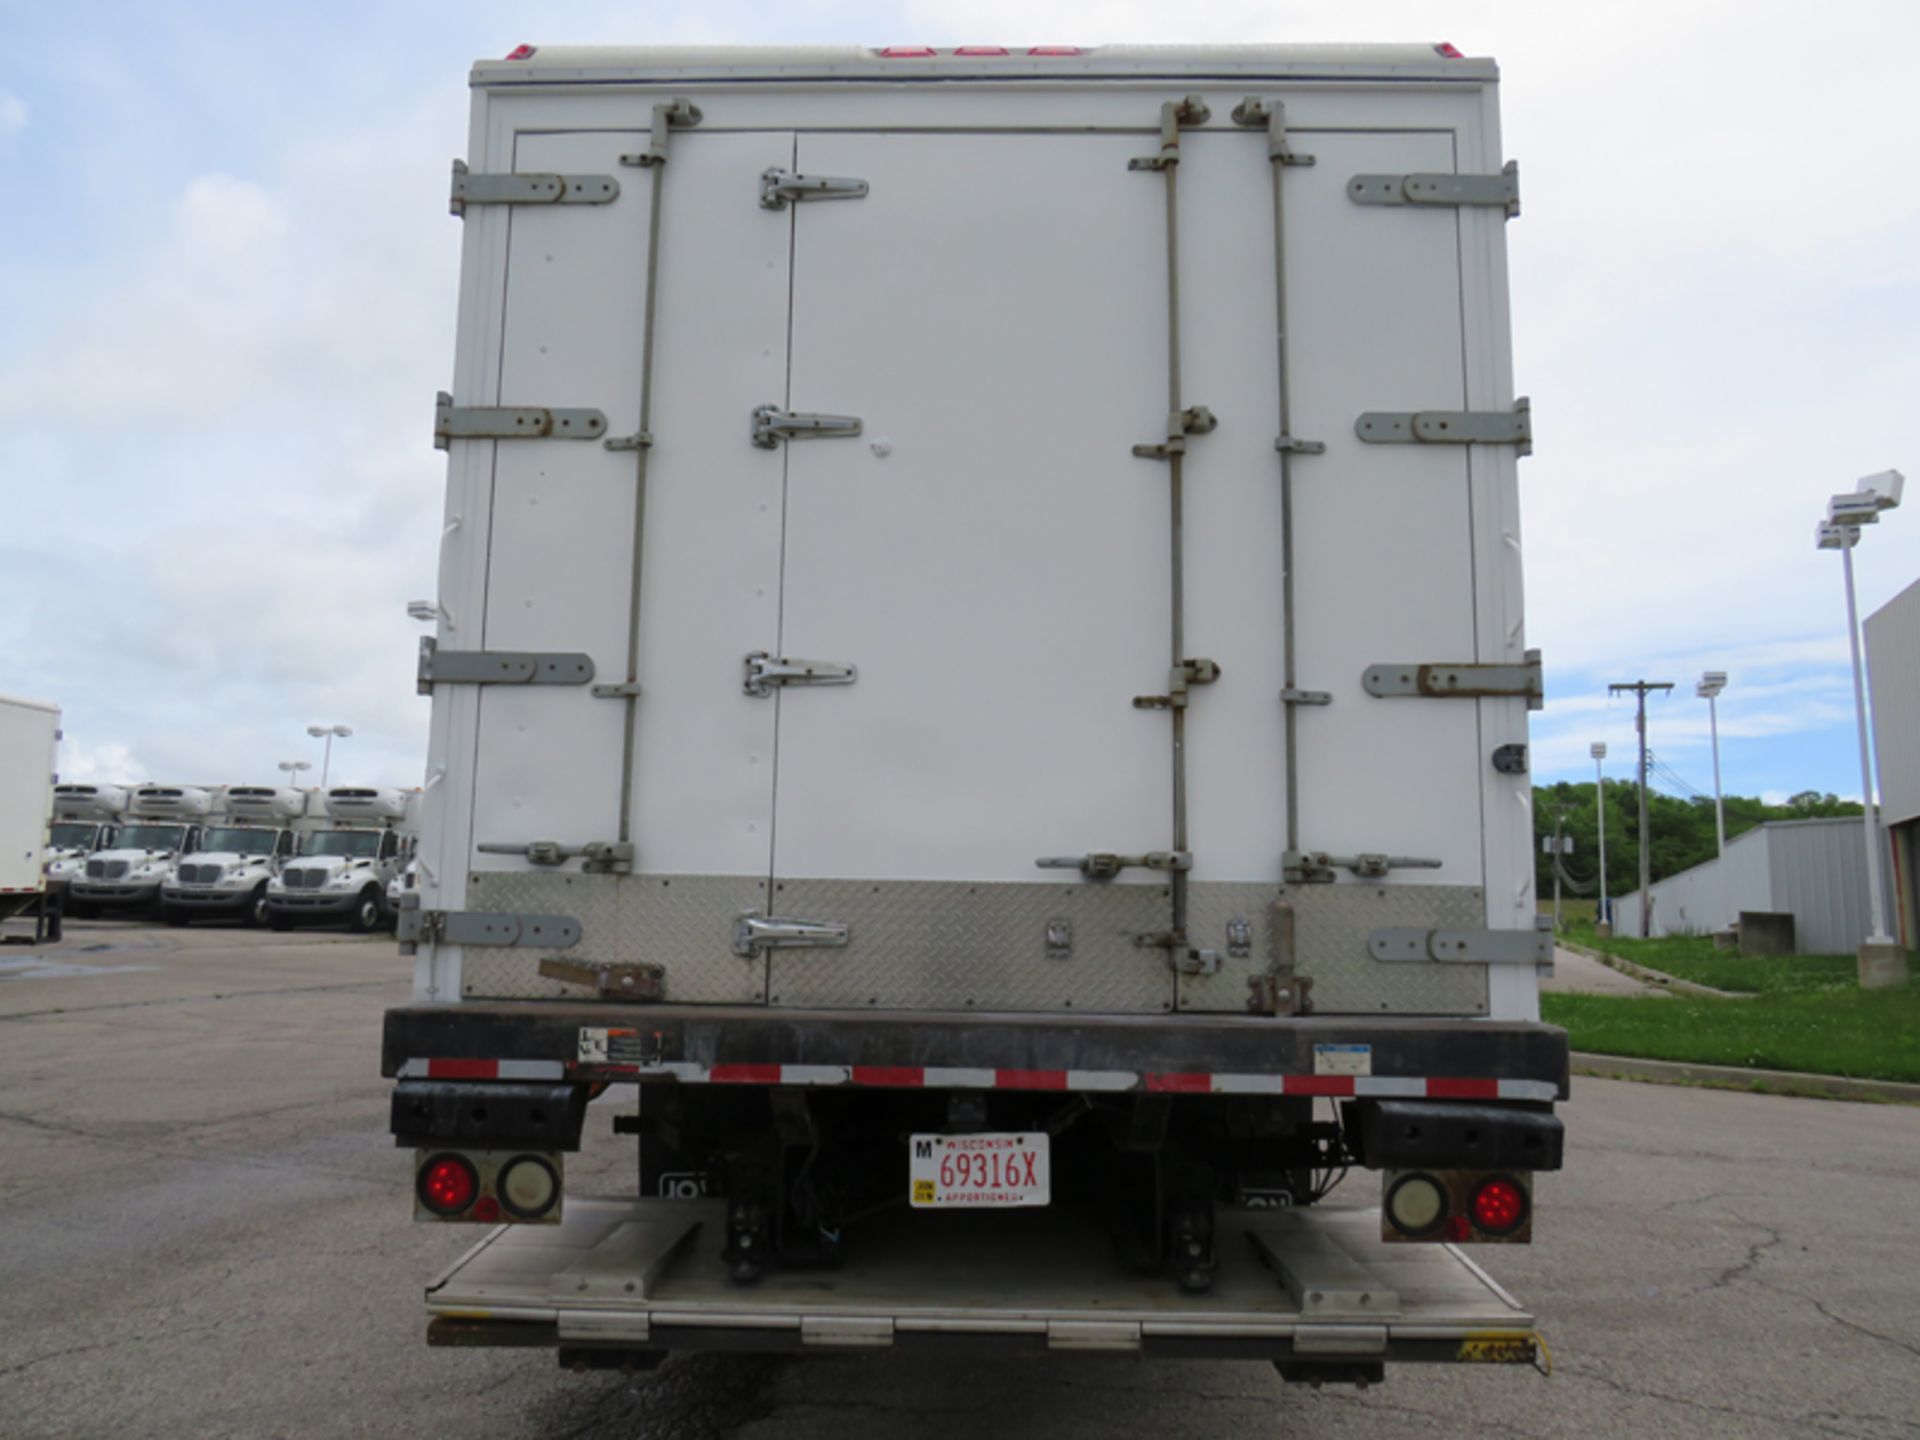 2018 INTERNATIONAL 4400 SBA 6X4 REFRIGERATED BOX TRUCK VIN#: 1HTMSTAR1JH529764, Approx Miles: 42060, - Image 4 of 9